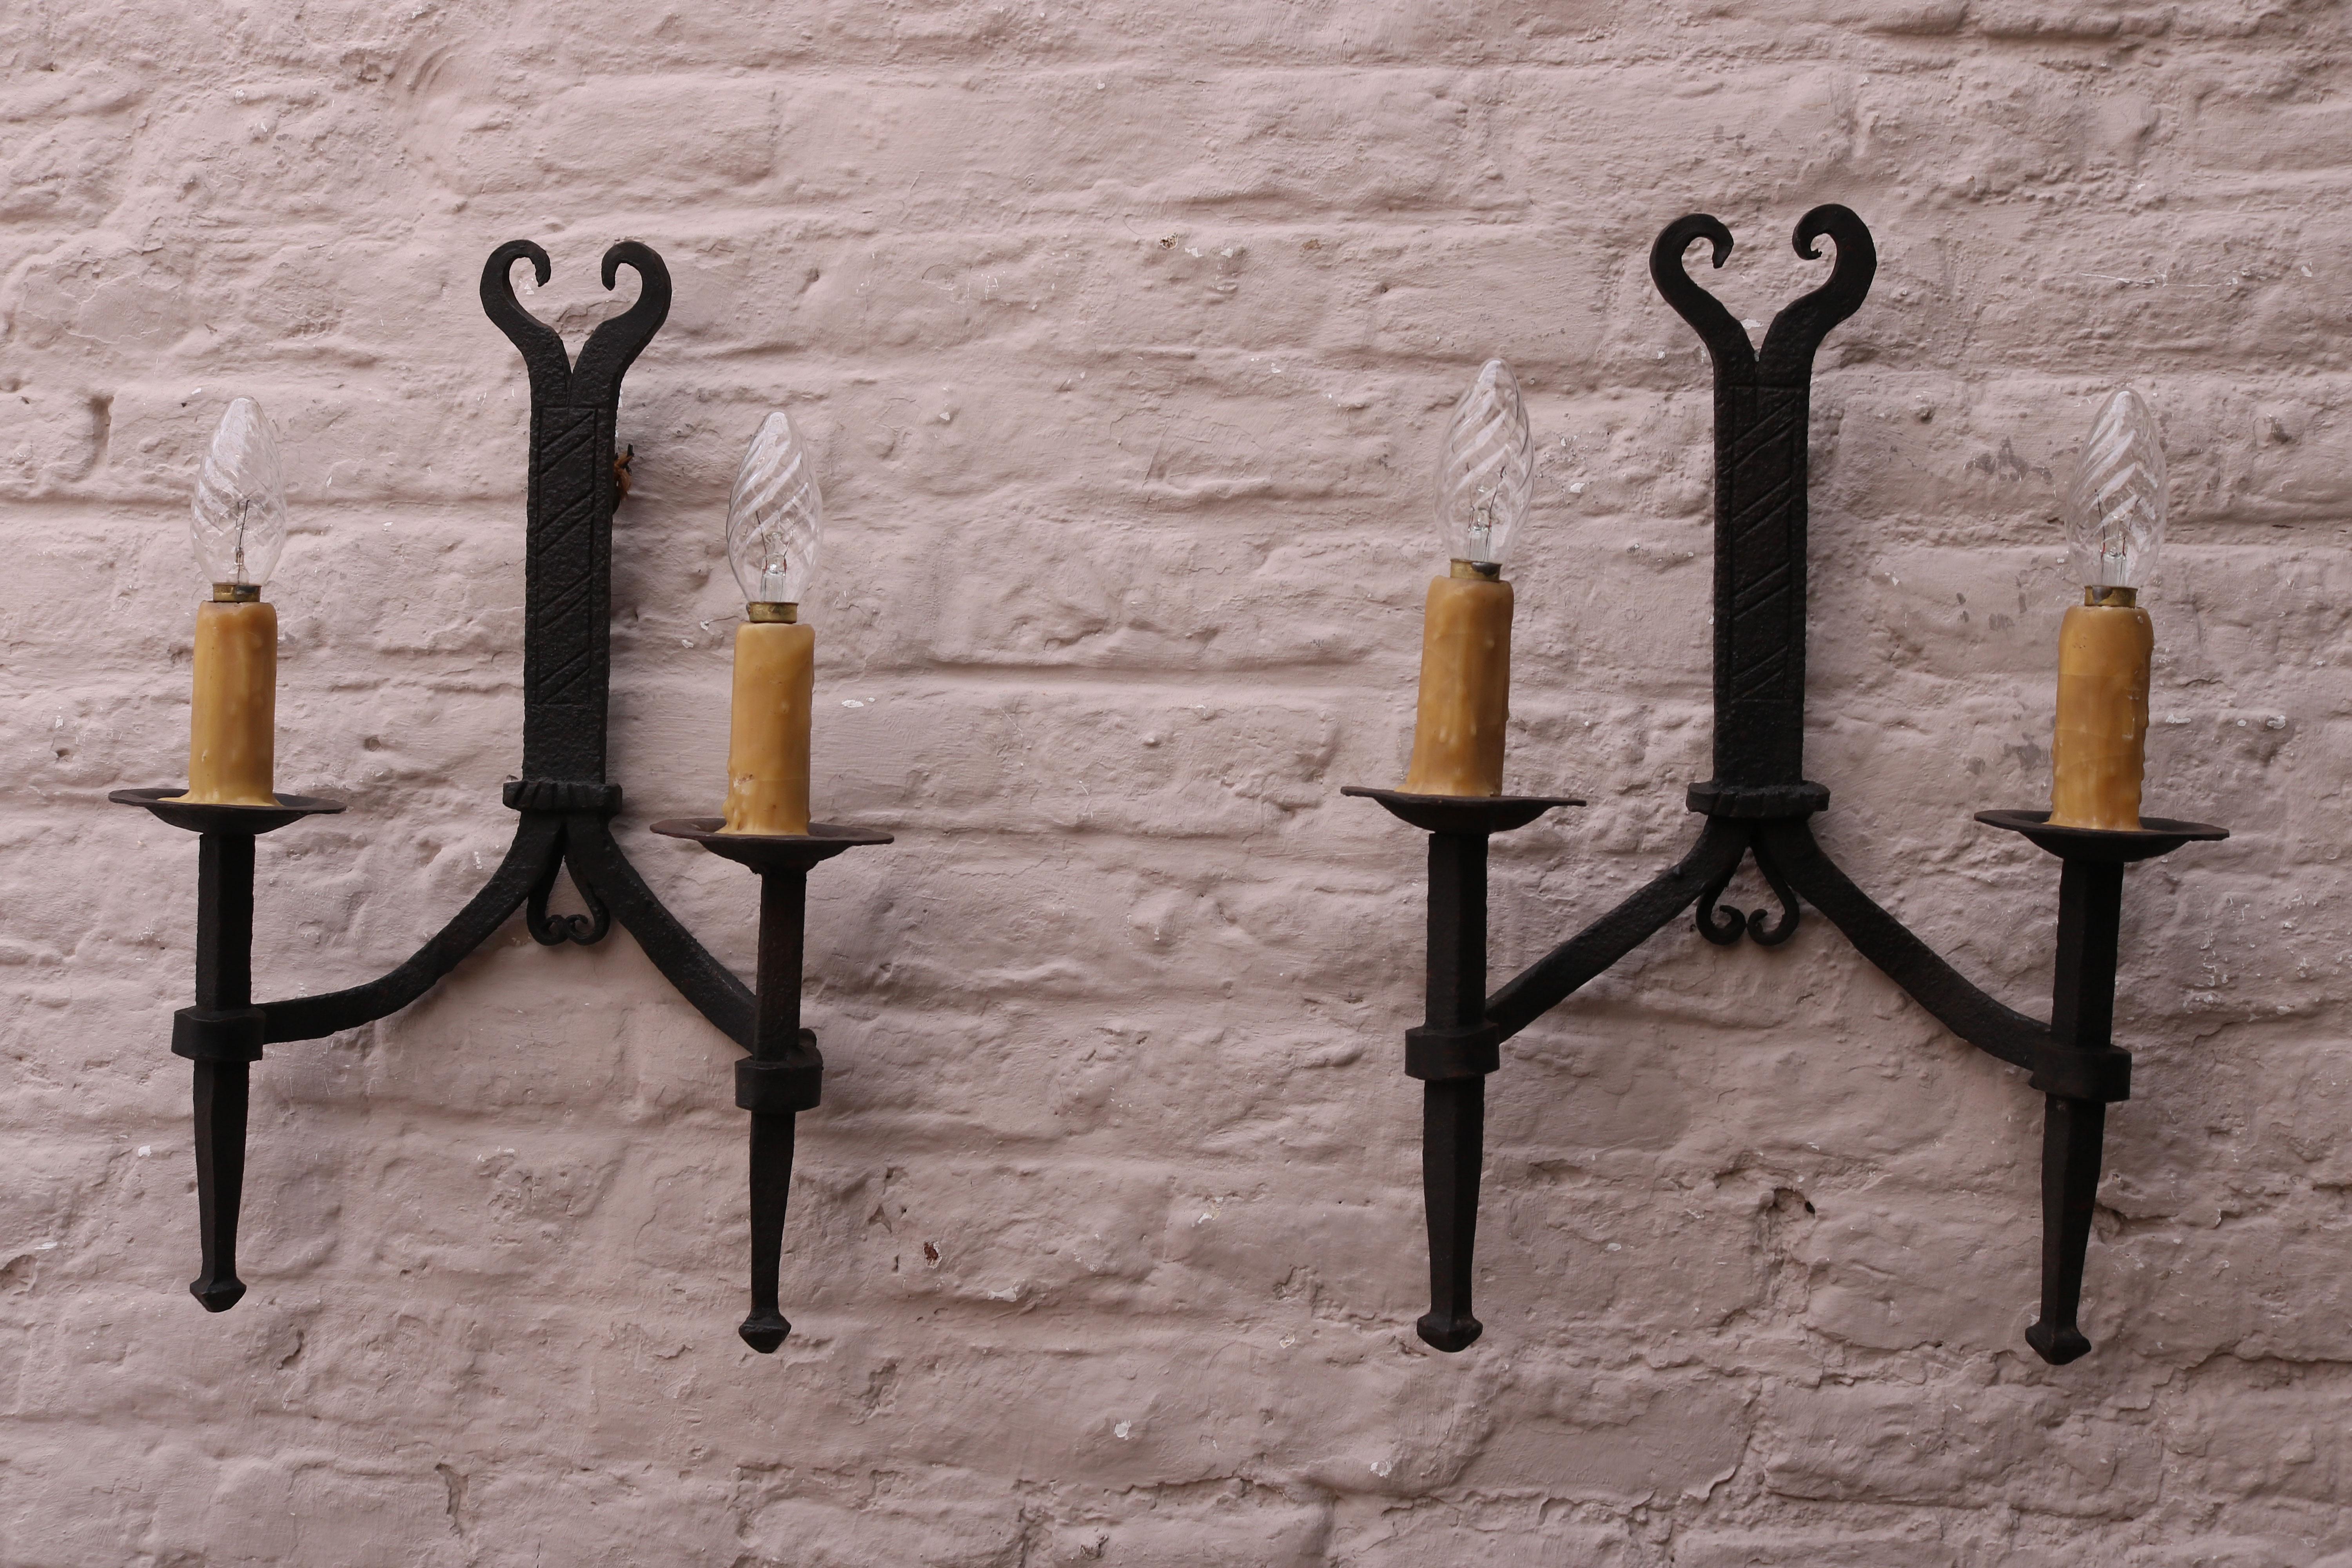 Arts and Crafts Antique Wrought Iron Wall Lights / Sconces 1900 Spanish Style Arts & Crafts